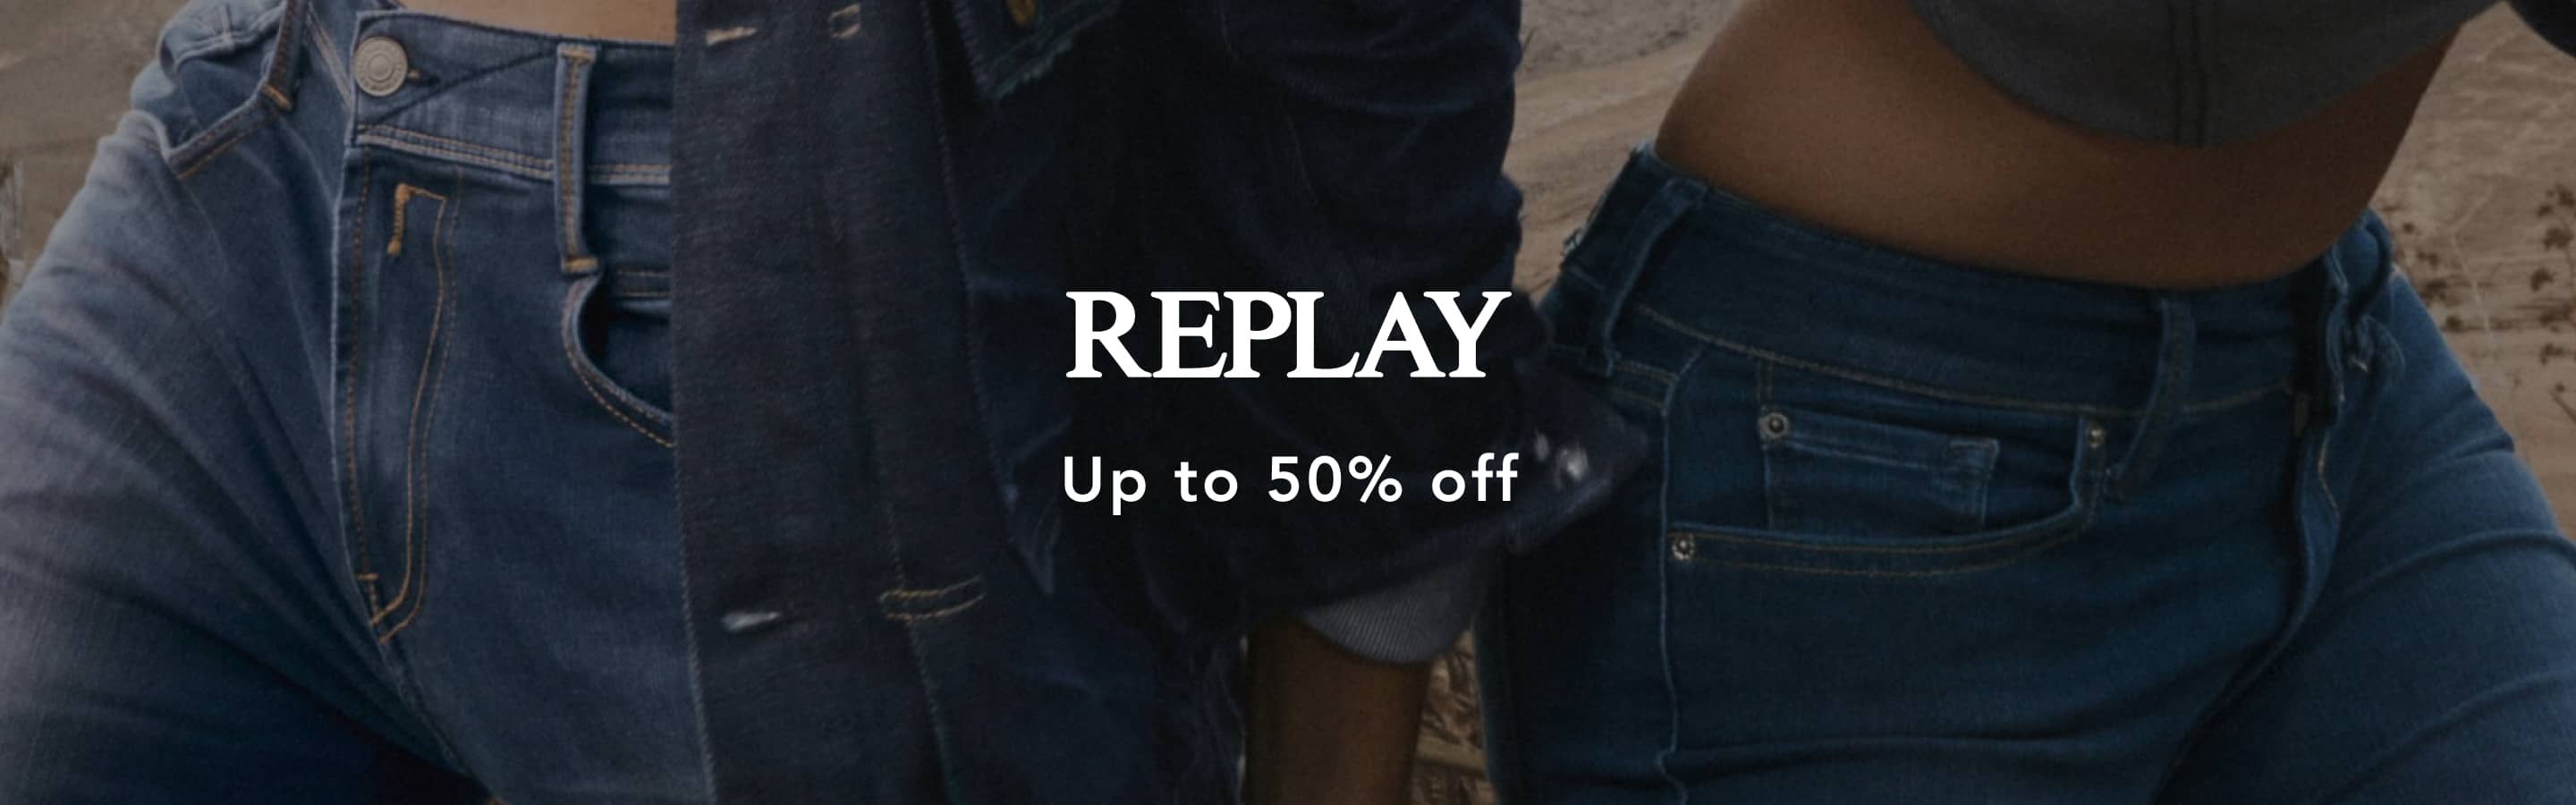 Replay Outlet | Sale on Jeans, Sunglasses & more | Secret Sales